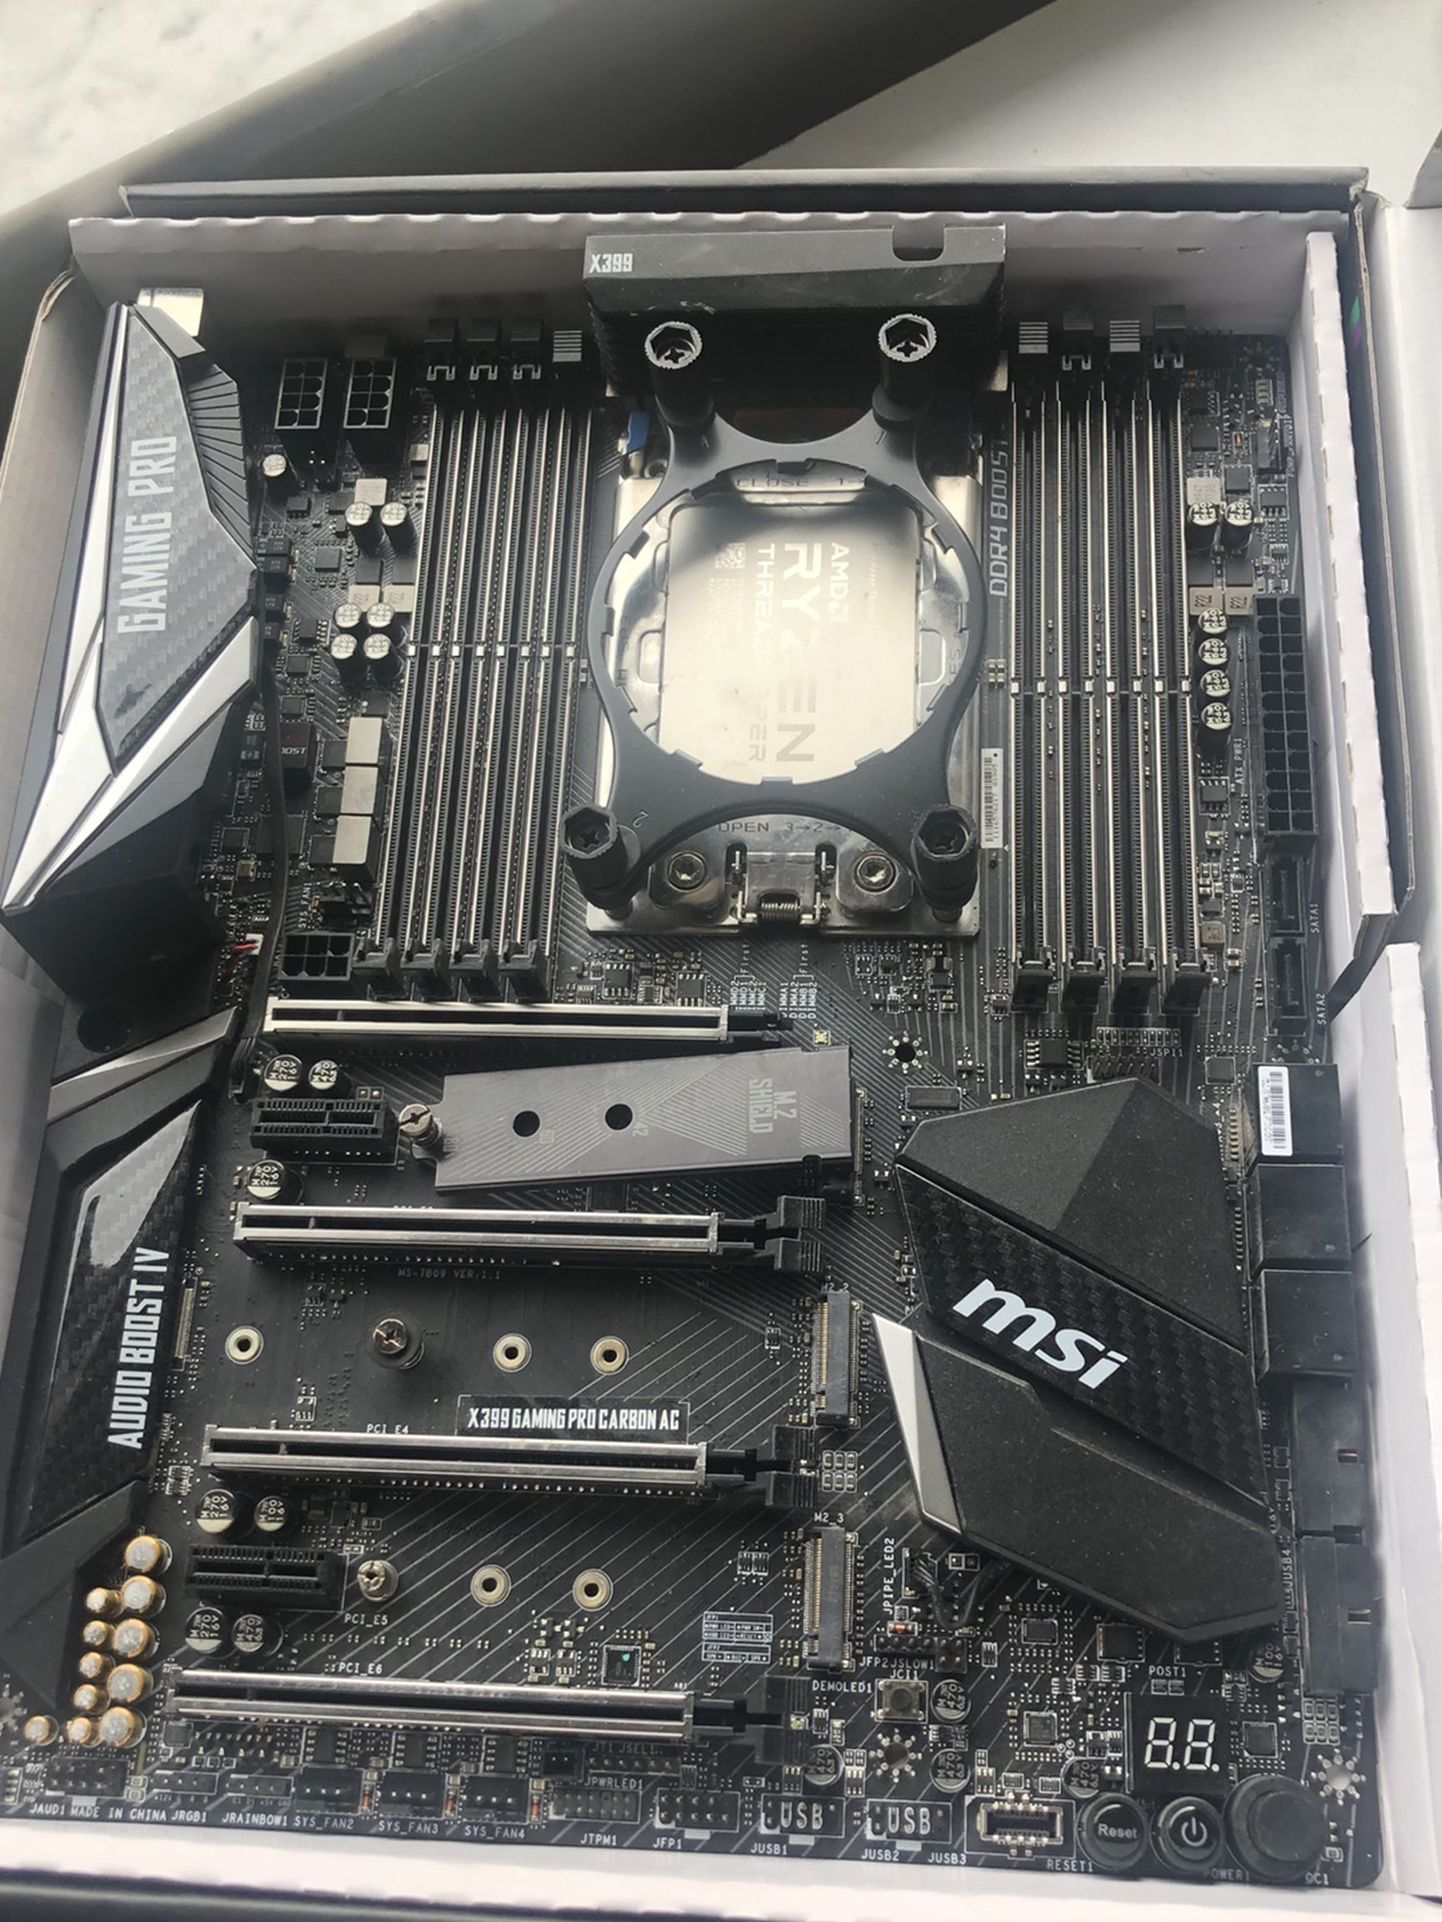 MSI x399 Gaming pro motherboard AMD threadripper cpu 1900x 8 core 16 threads 3.8 ghz up to 4.0 ghz